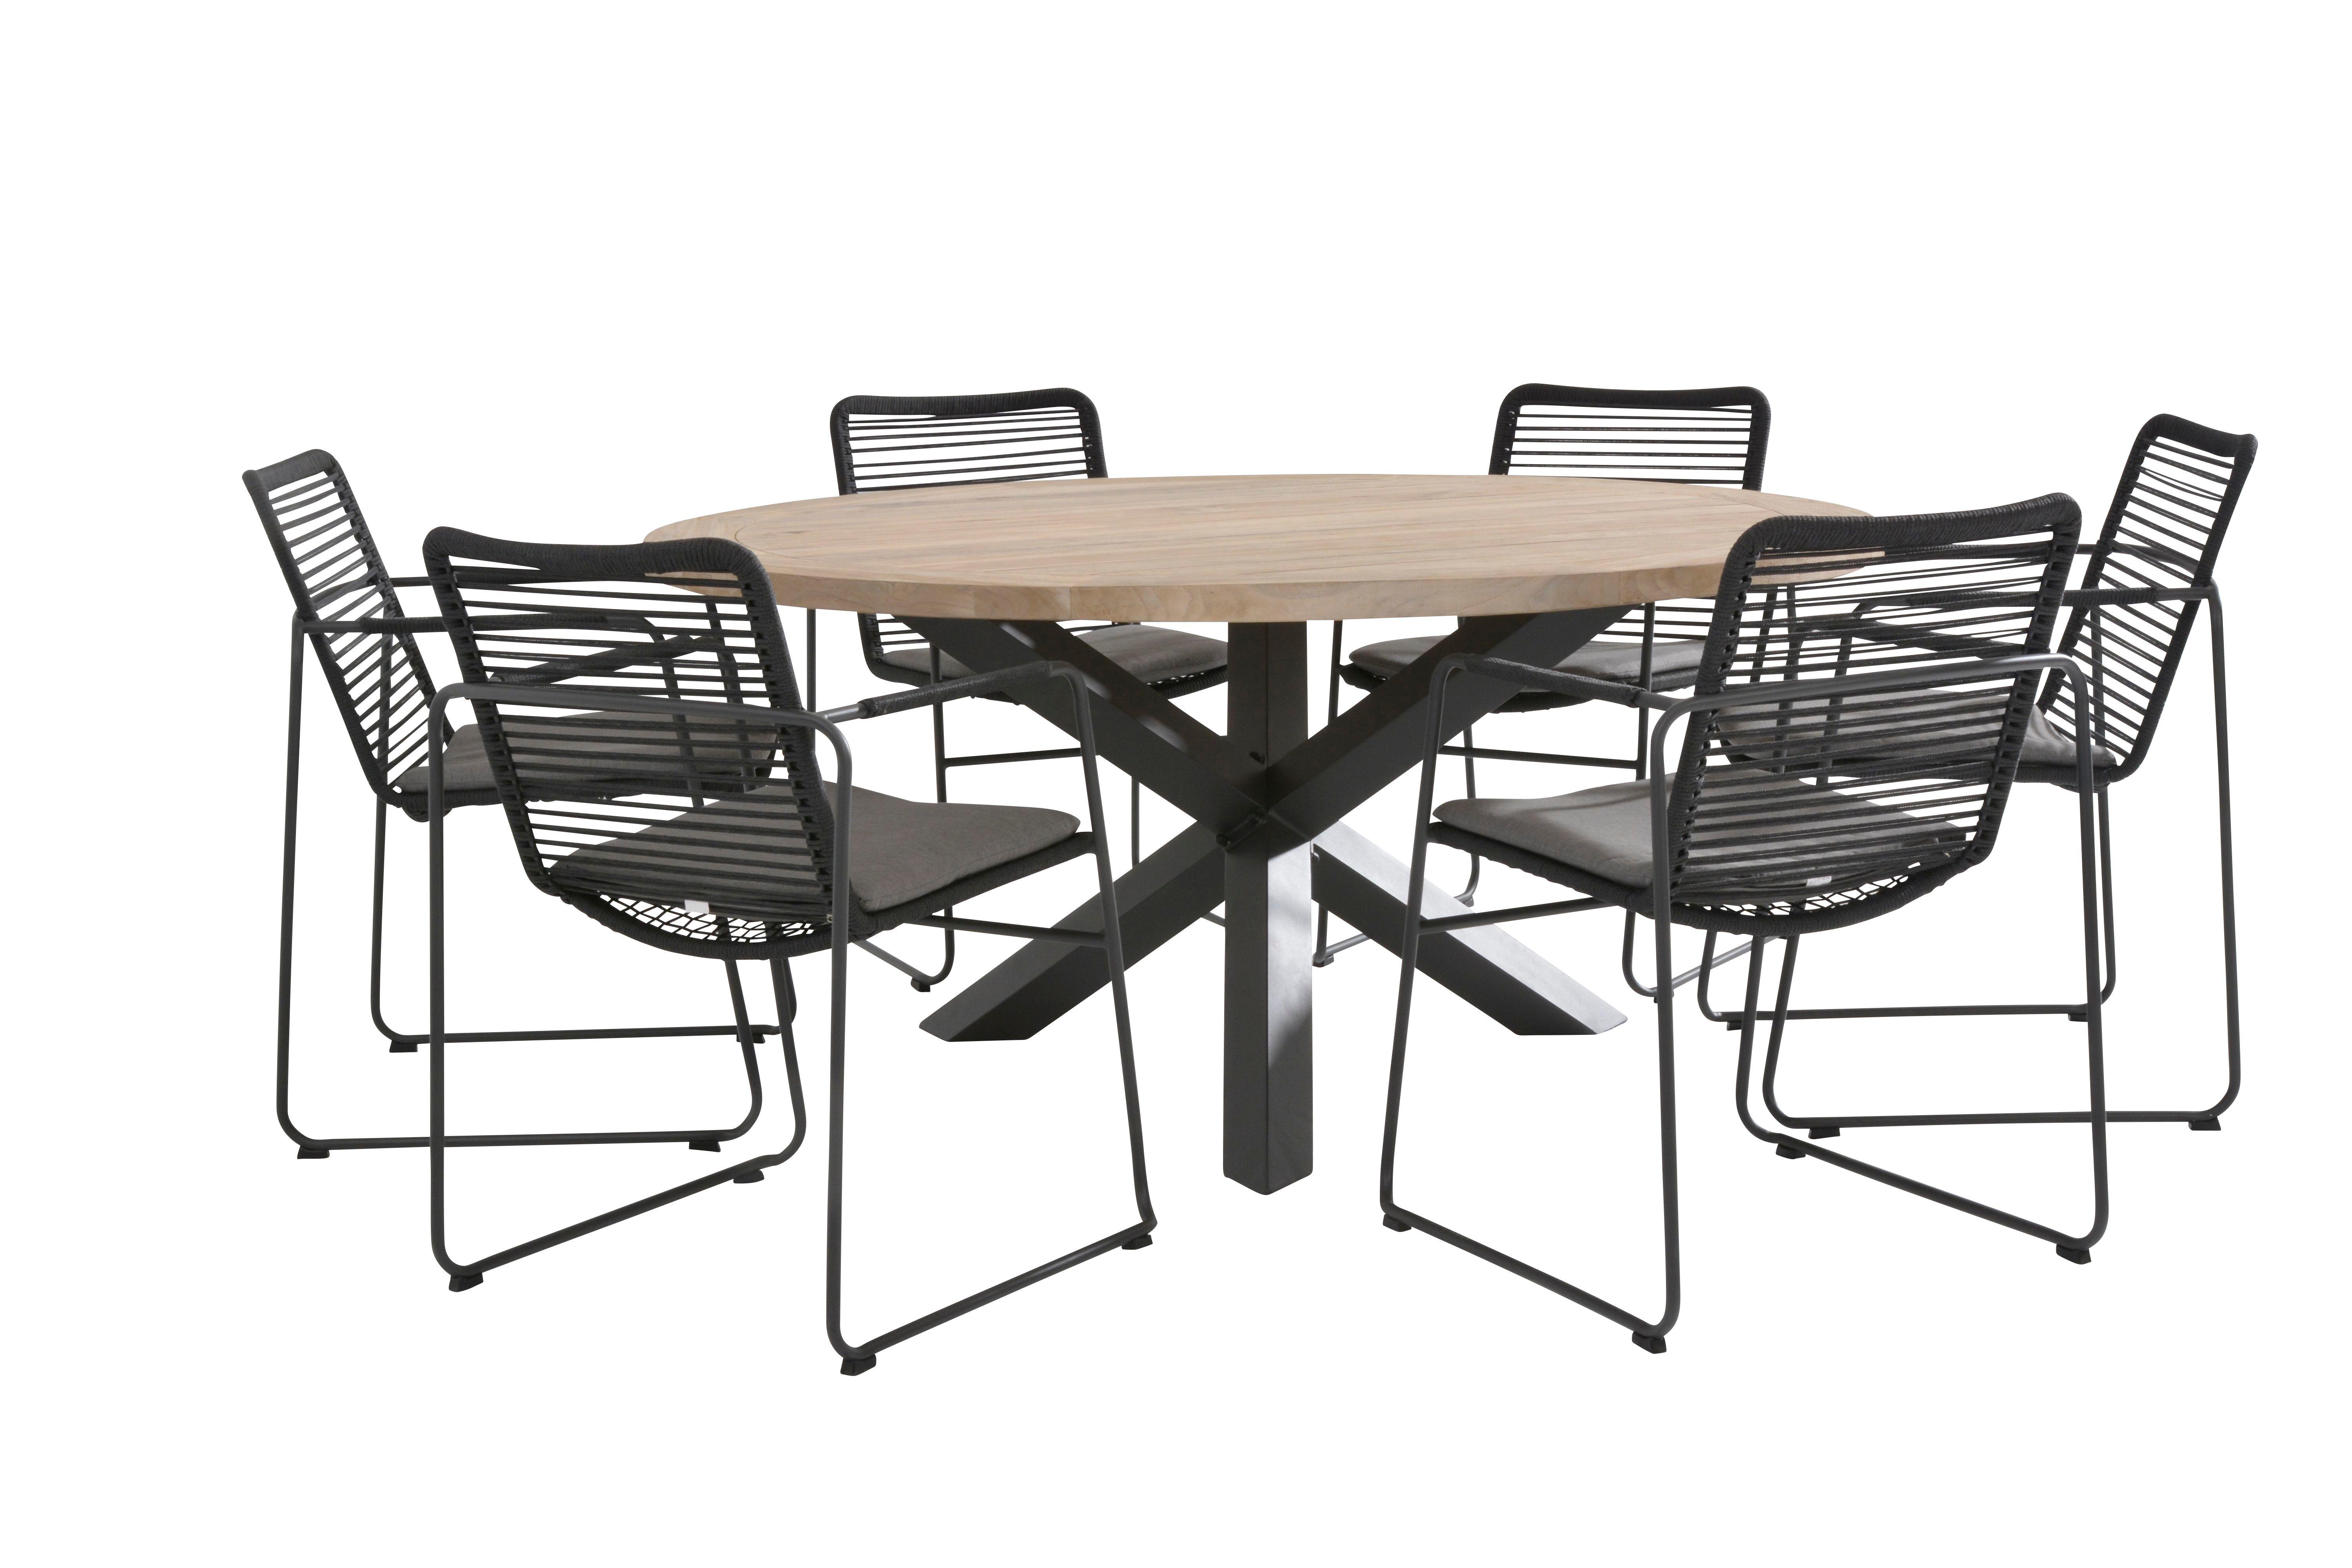 cut out set of round 160 cm teak garden dining table and 6 rope weave and aluminium patio garden dining chairs